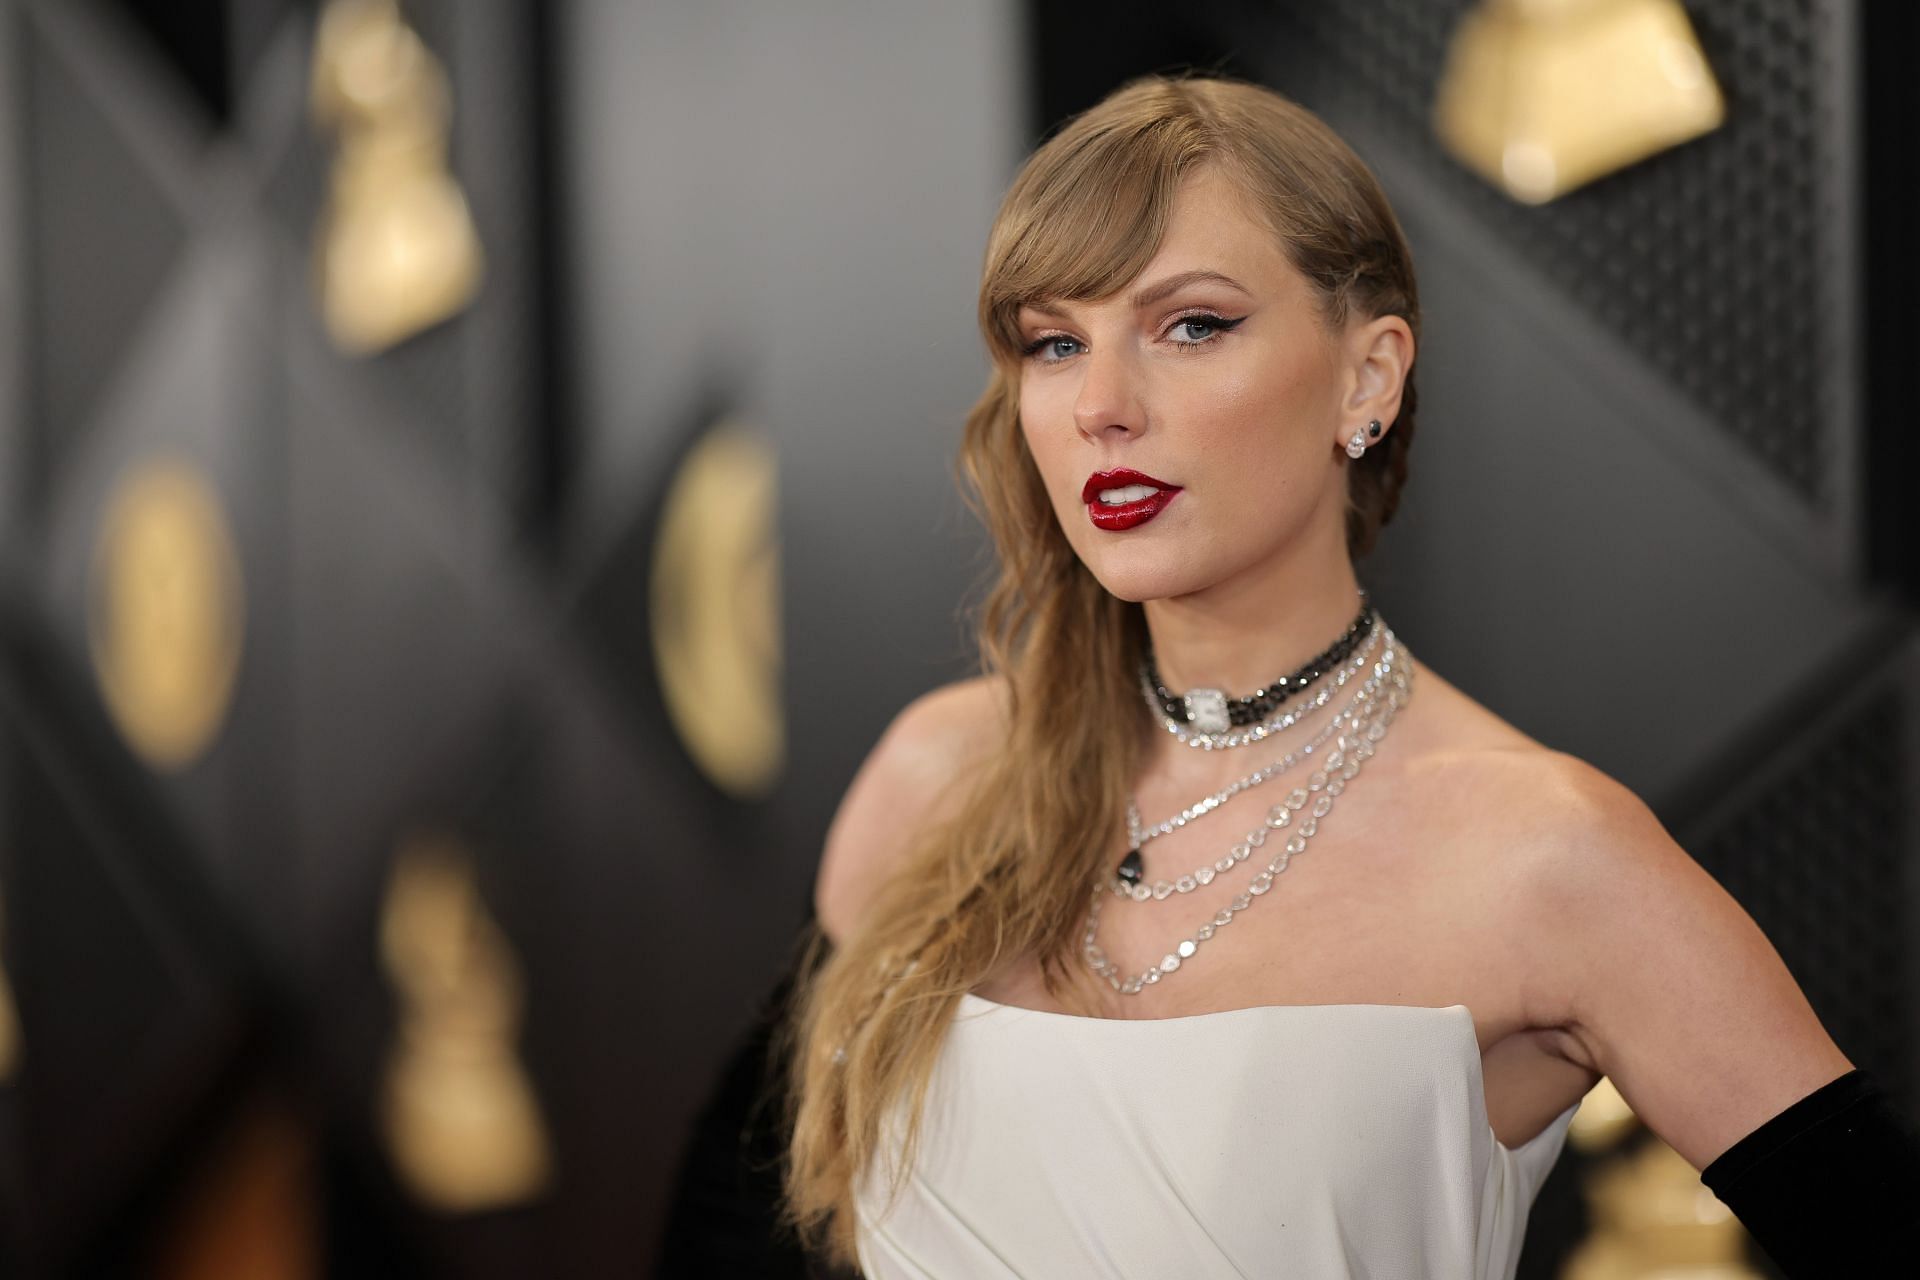 Taylor Swift announces first group of opening acts for her The